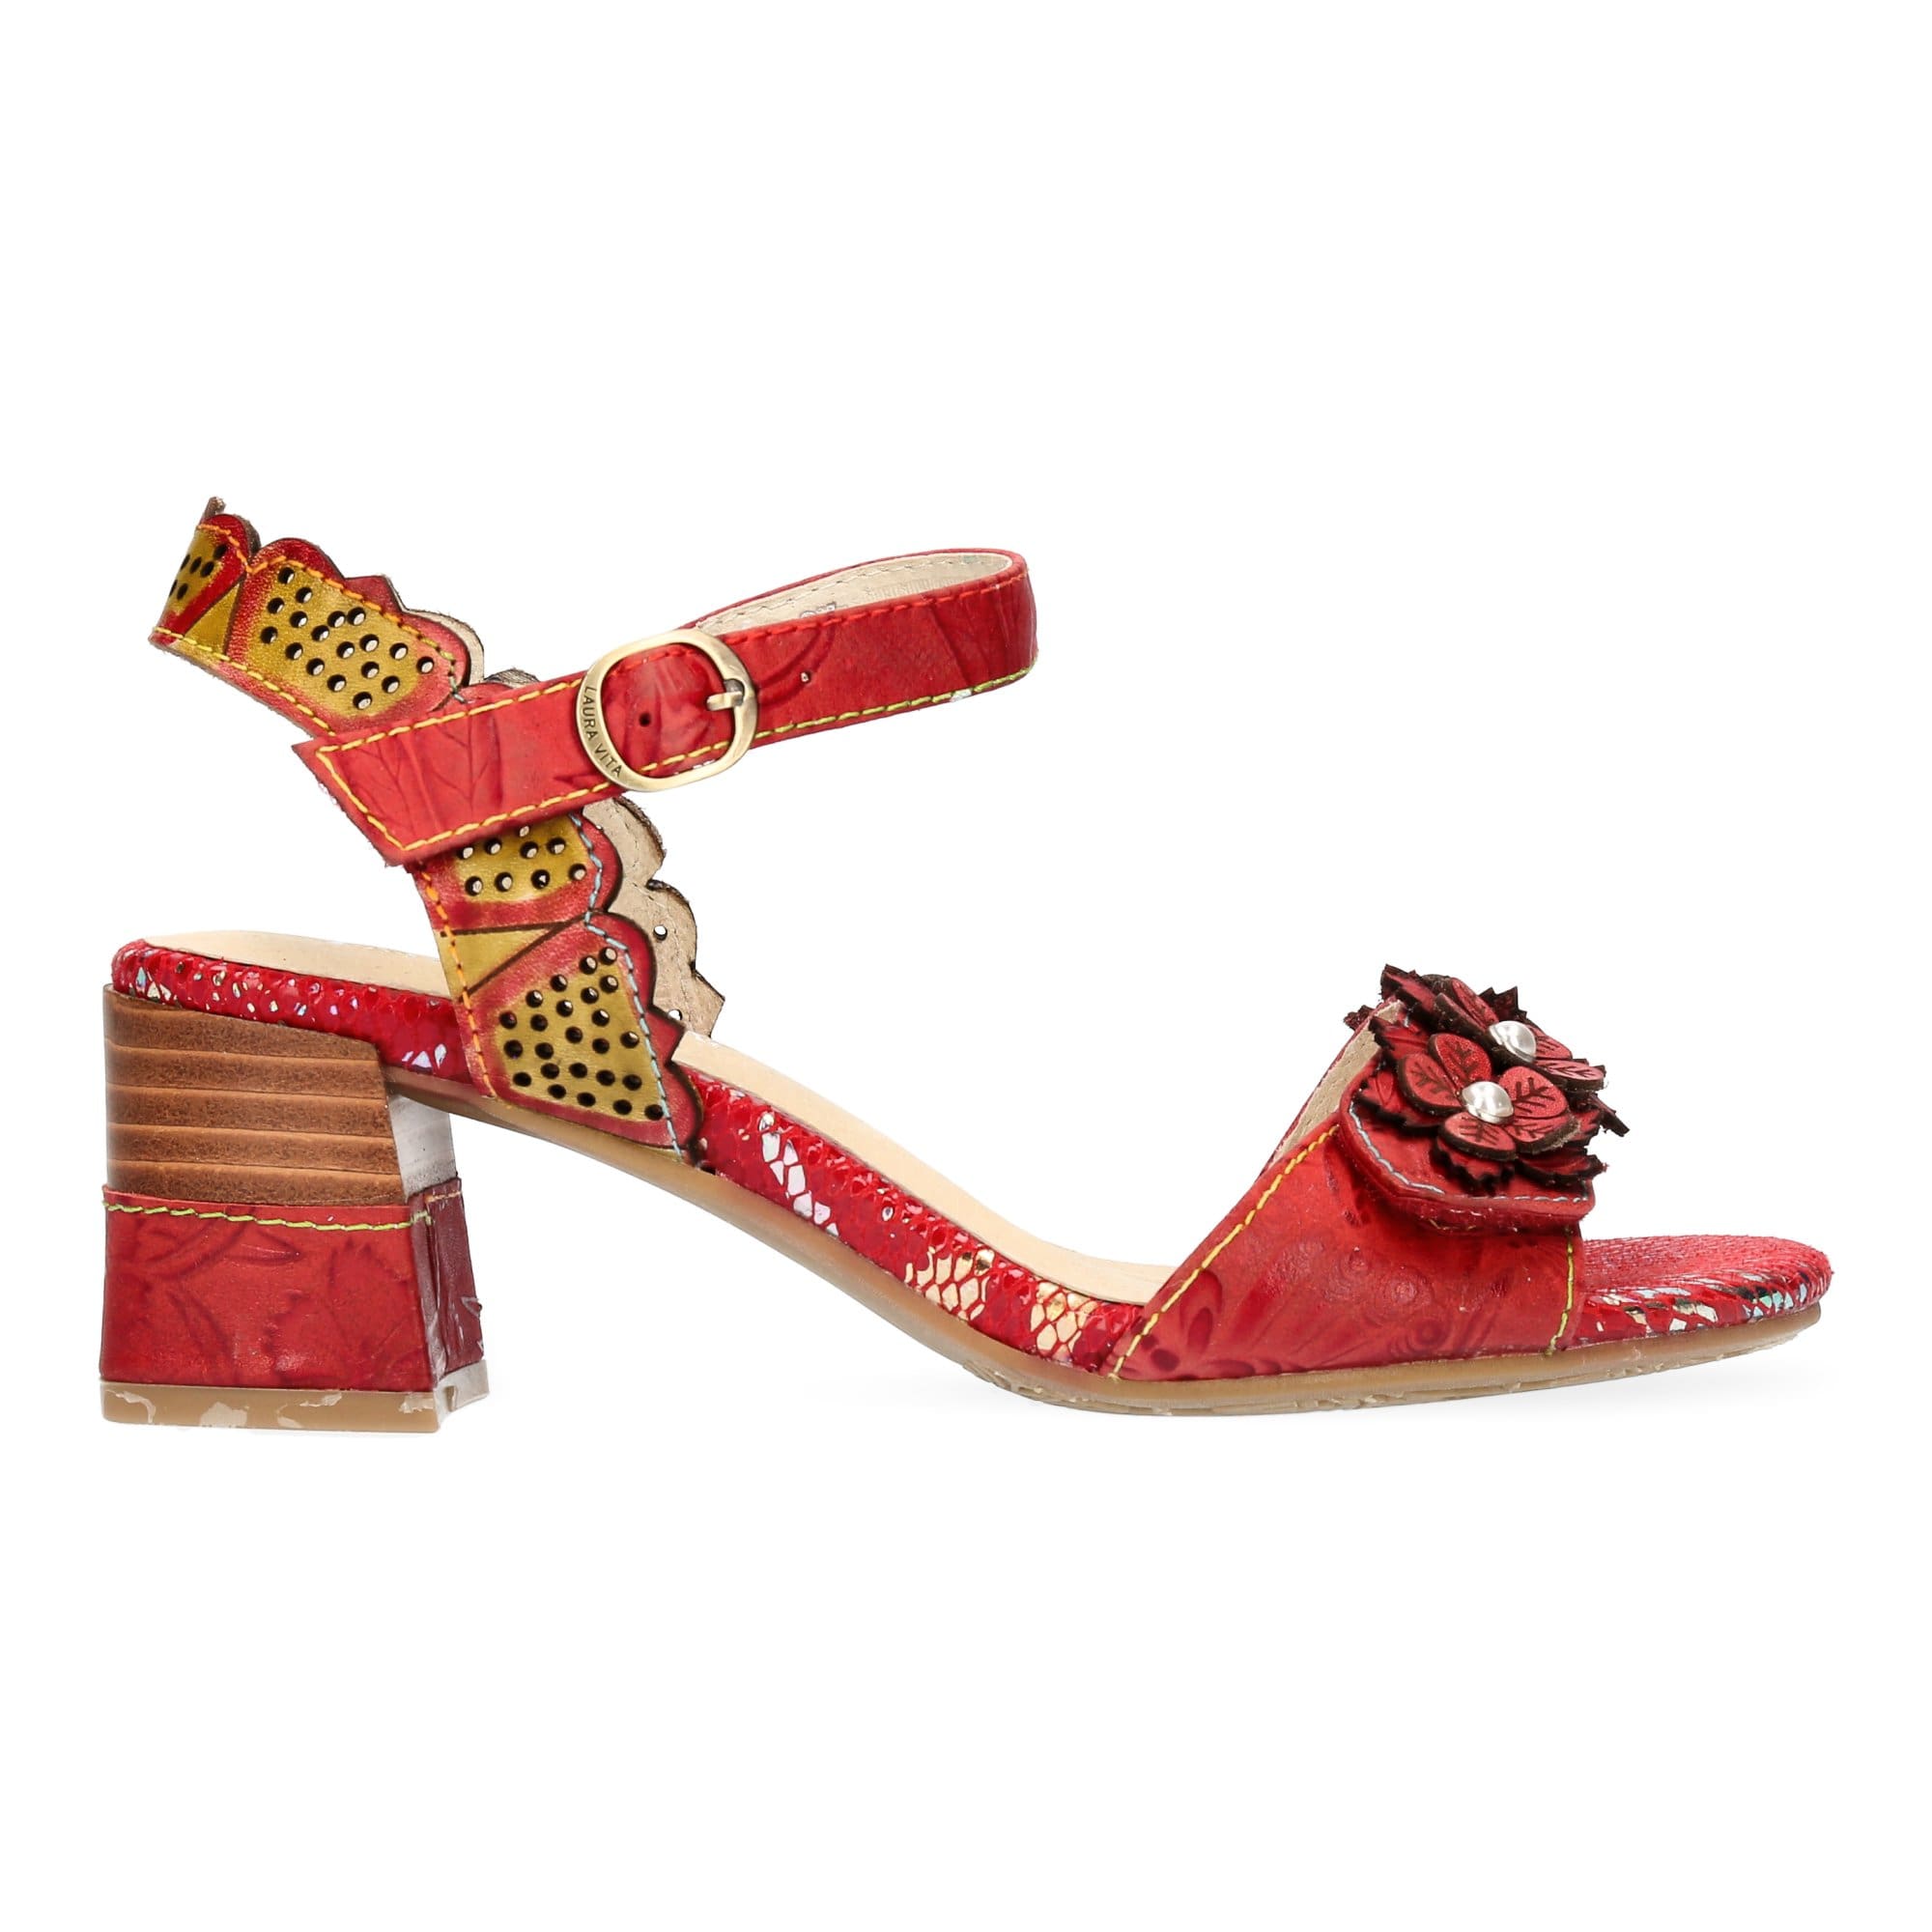 Shoes JACCINTHEO 03 - 35 / Red - Sandal